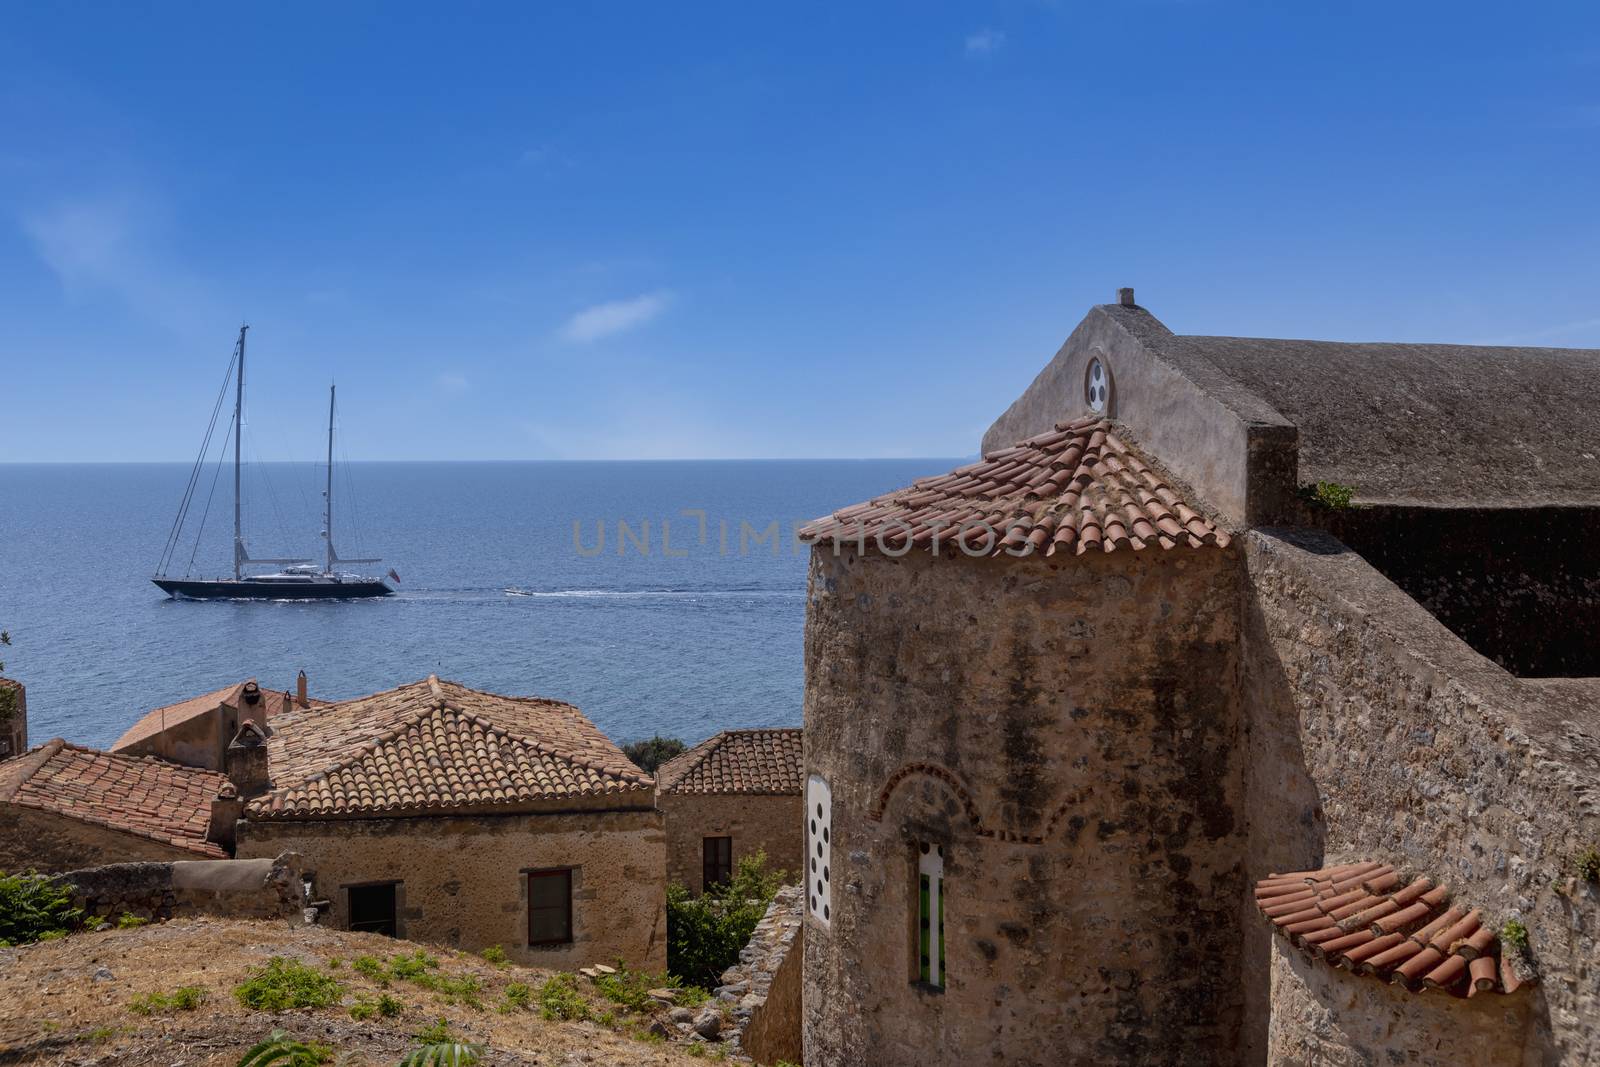 View of the old town of Monemvasia in Lakonia of Peloponnese, Greece.

